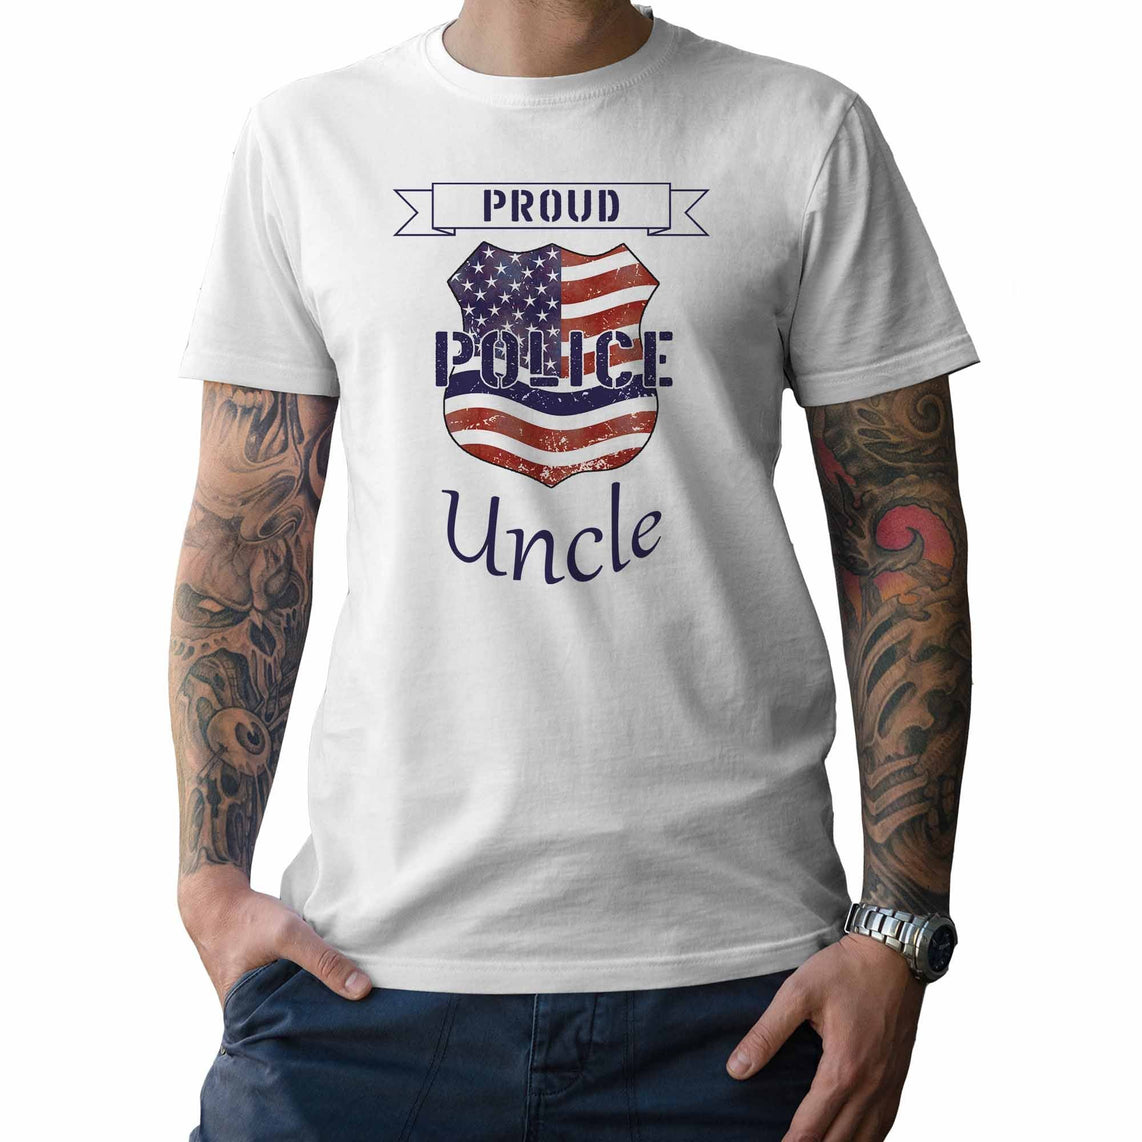 Proud Police Uncle - My Custom Tee Party